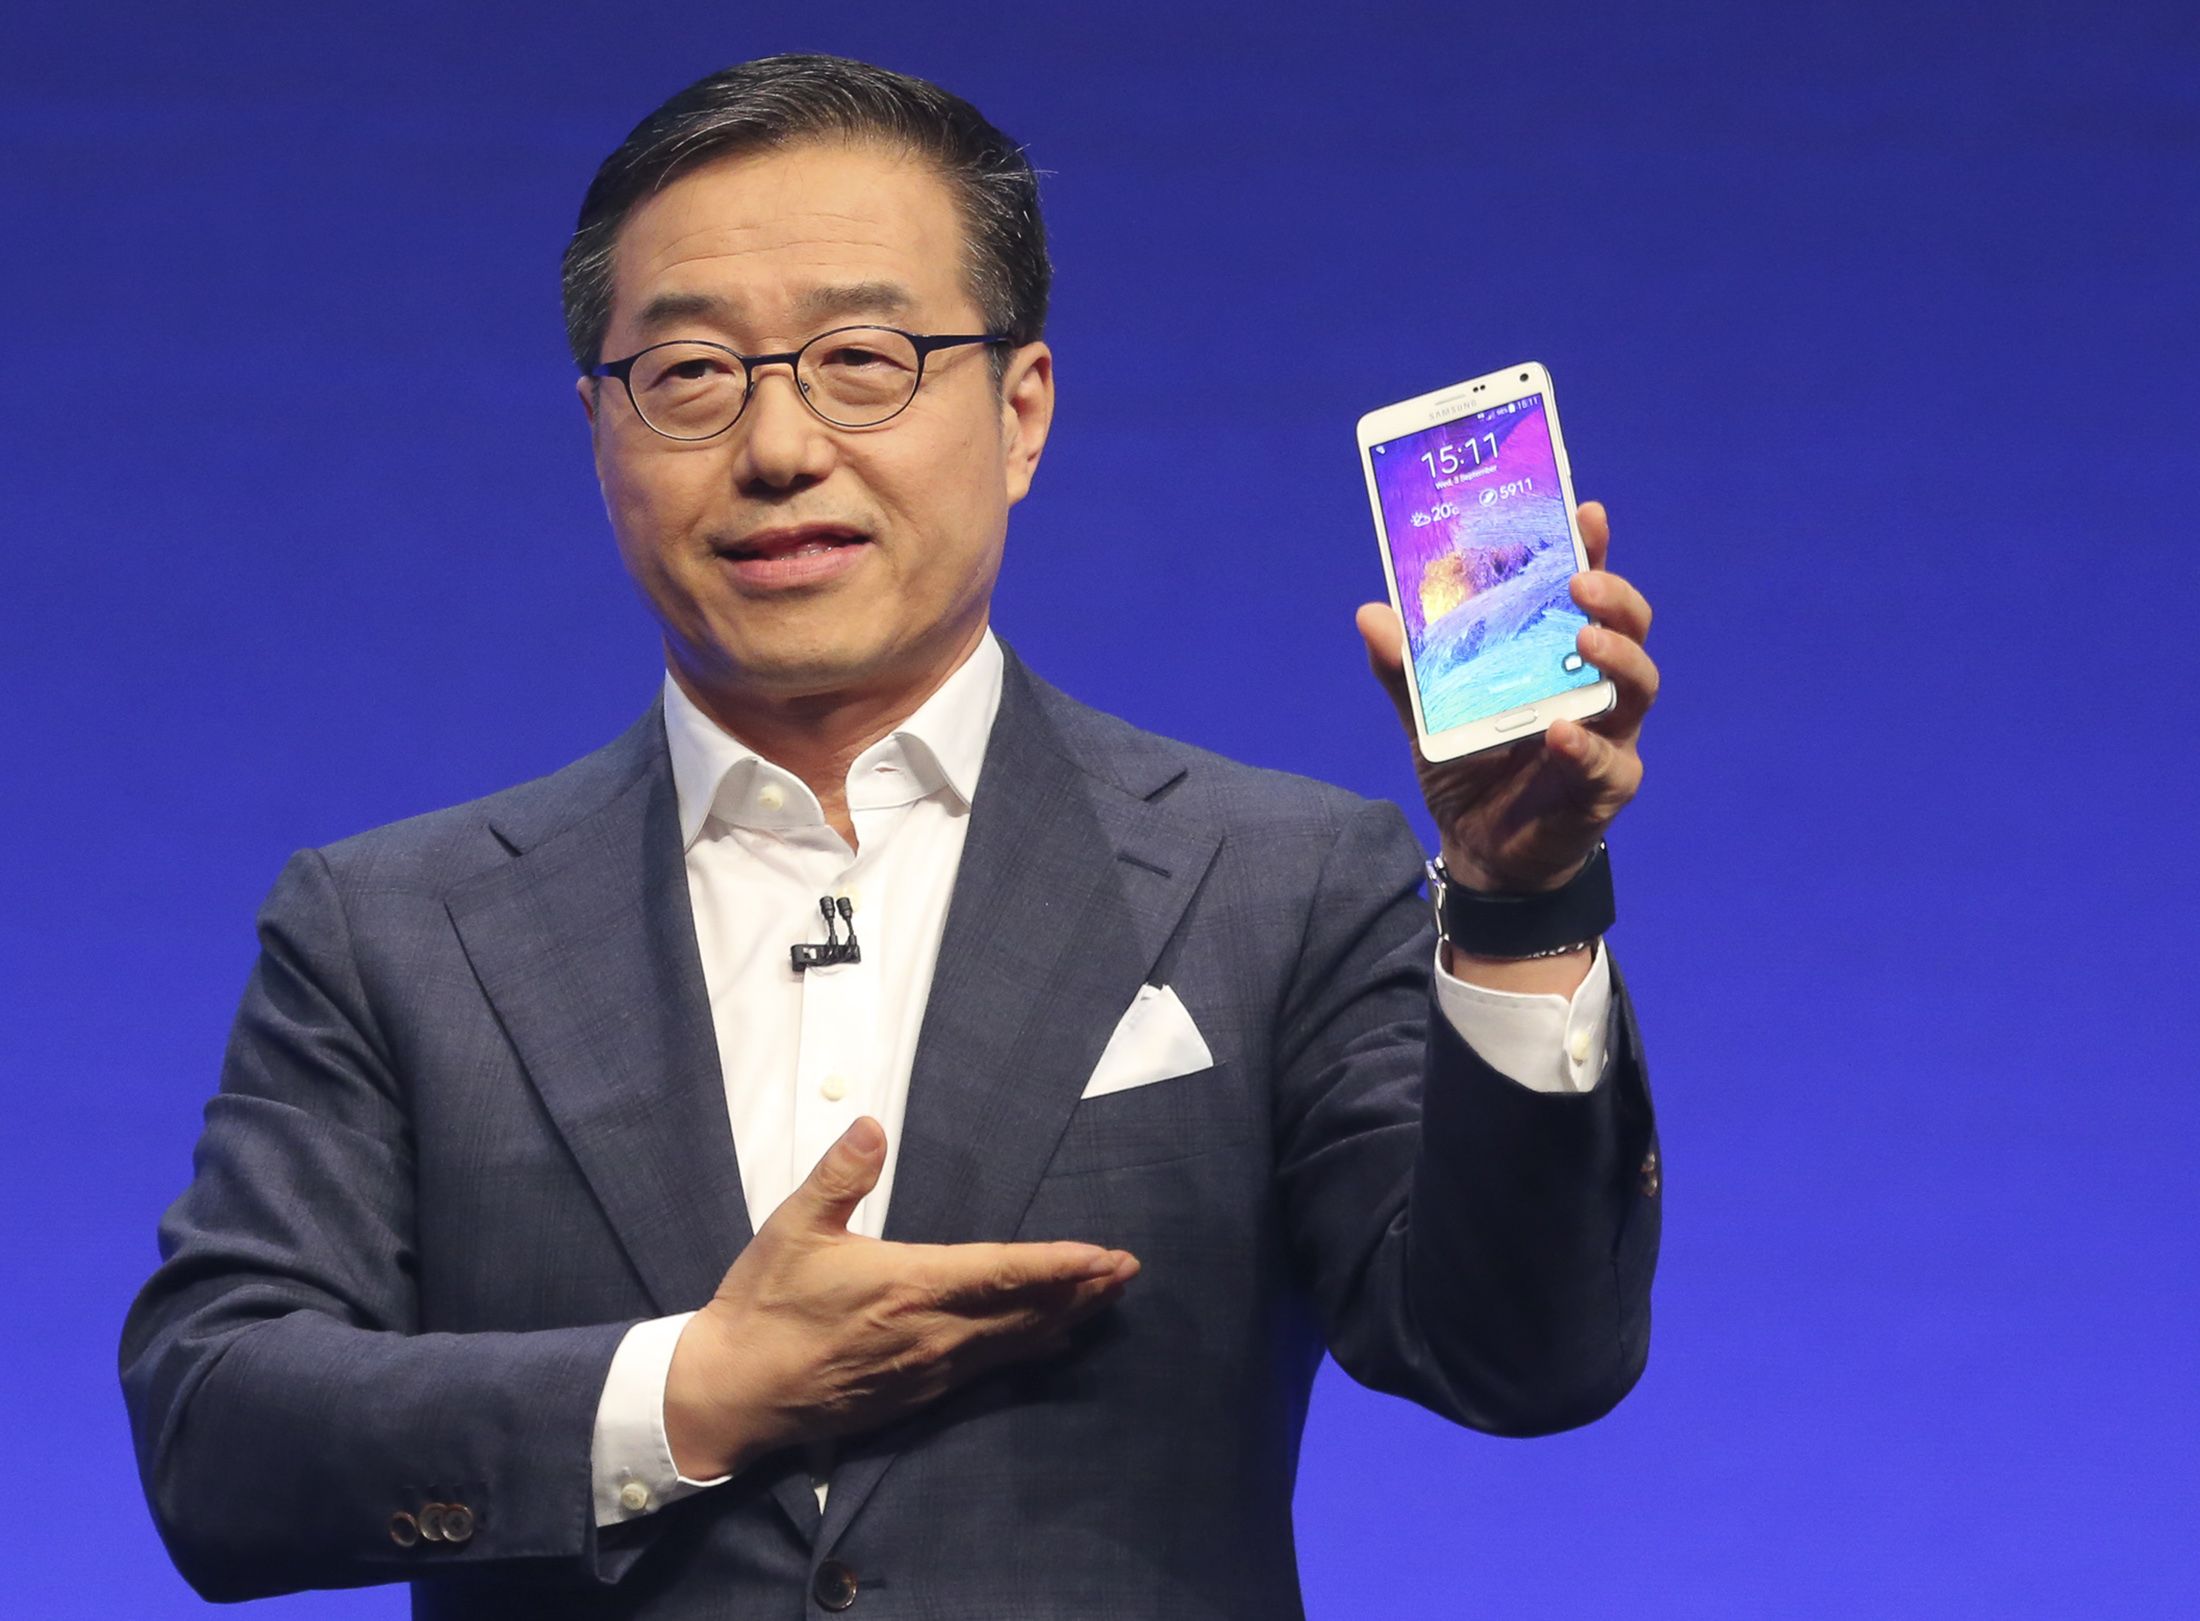 Samsung Galaxy Note 4 Price Slashed By 200 For A Limited Period